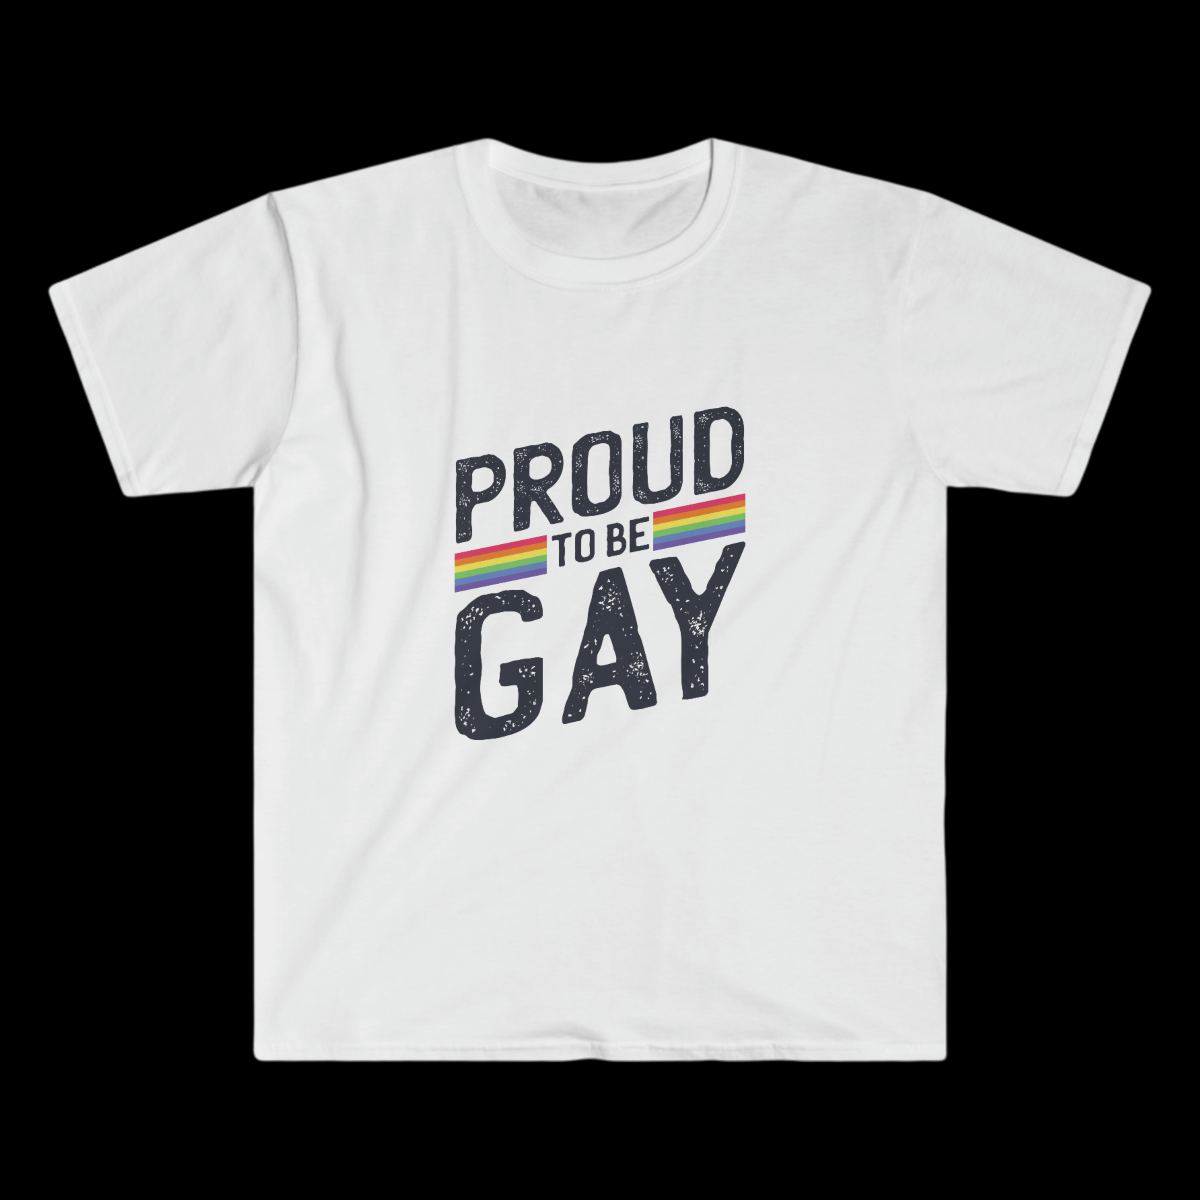 Show your true colors with our Proud to be Gay T-Shirt.